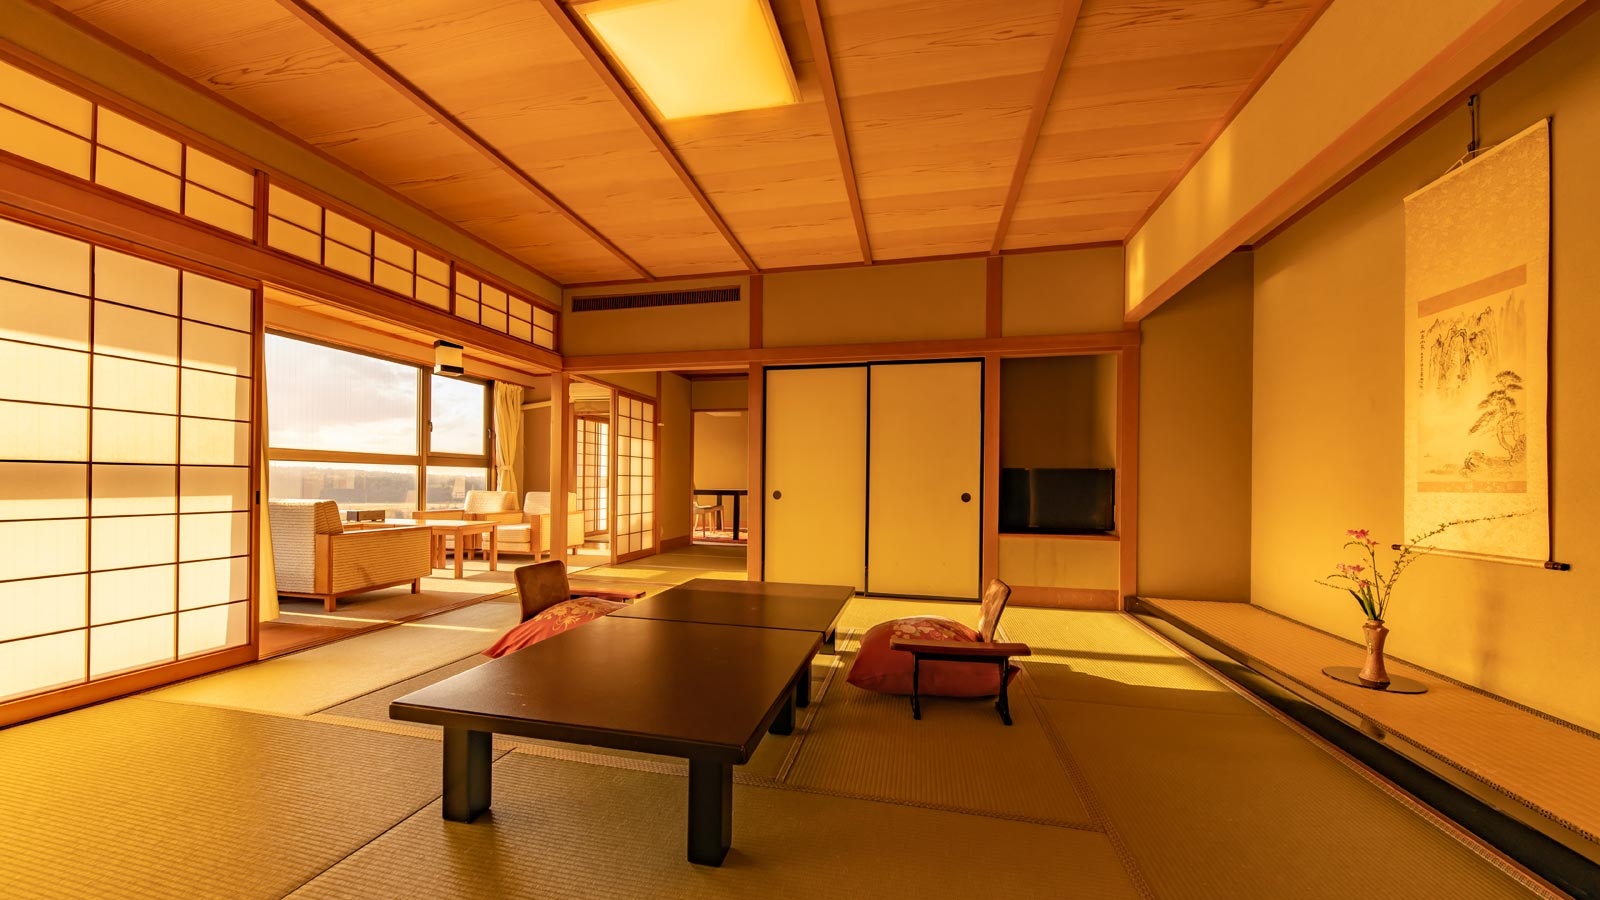 Top floor special room "Jibutei" with tea room and guest room for meals